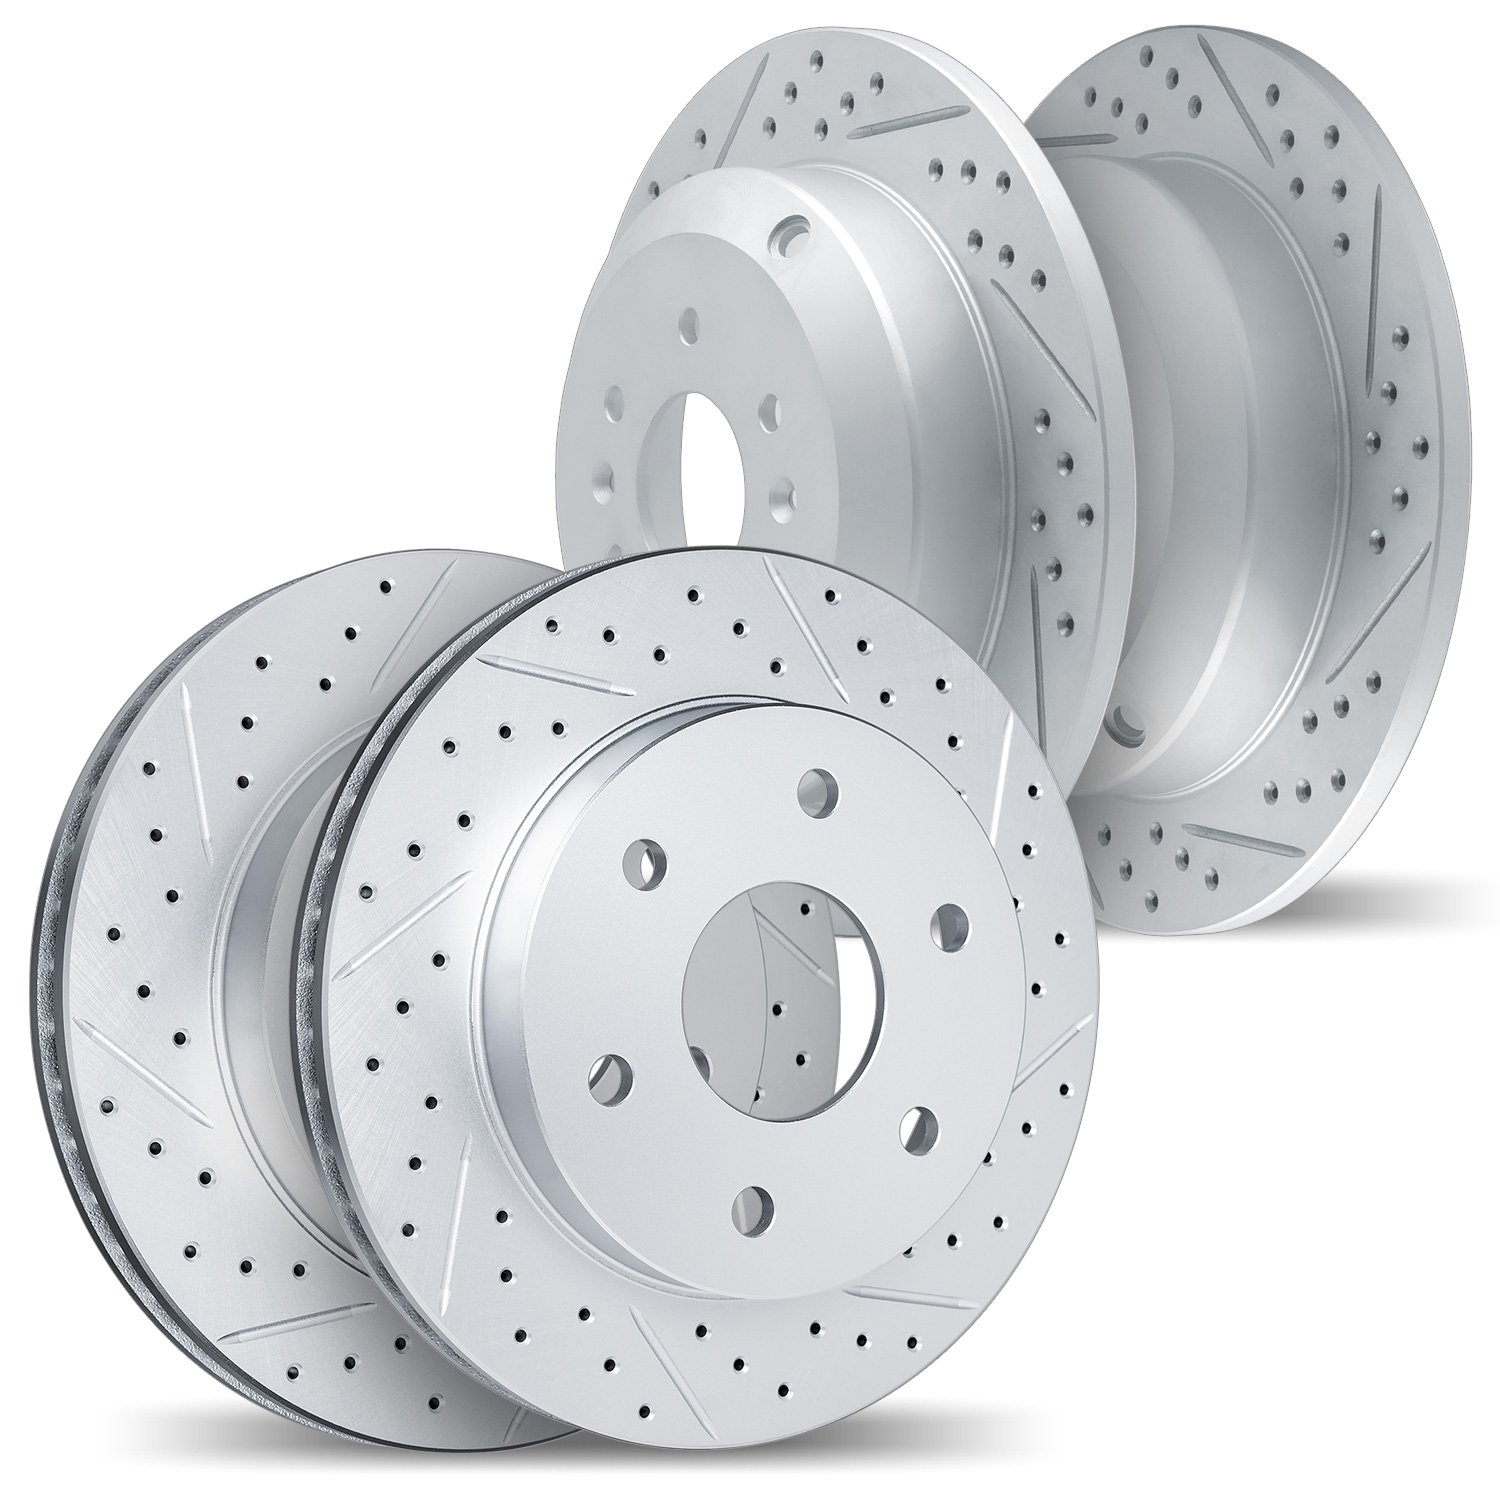 2004-93000 Geoperformance Drilled/Slotted Brake Rotors, 2006-2010 GM, Position: Front and Rear